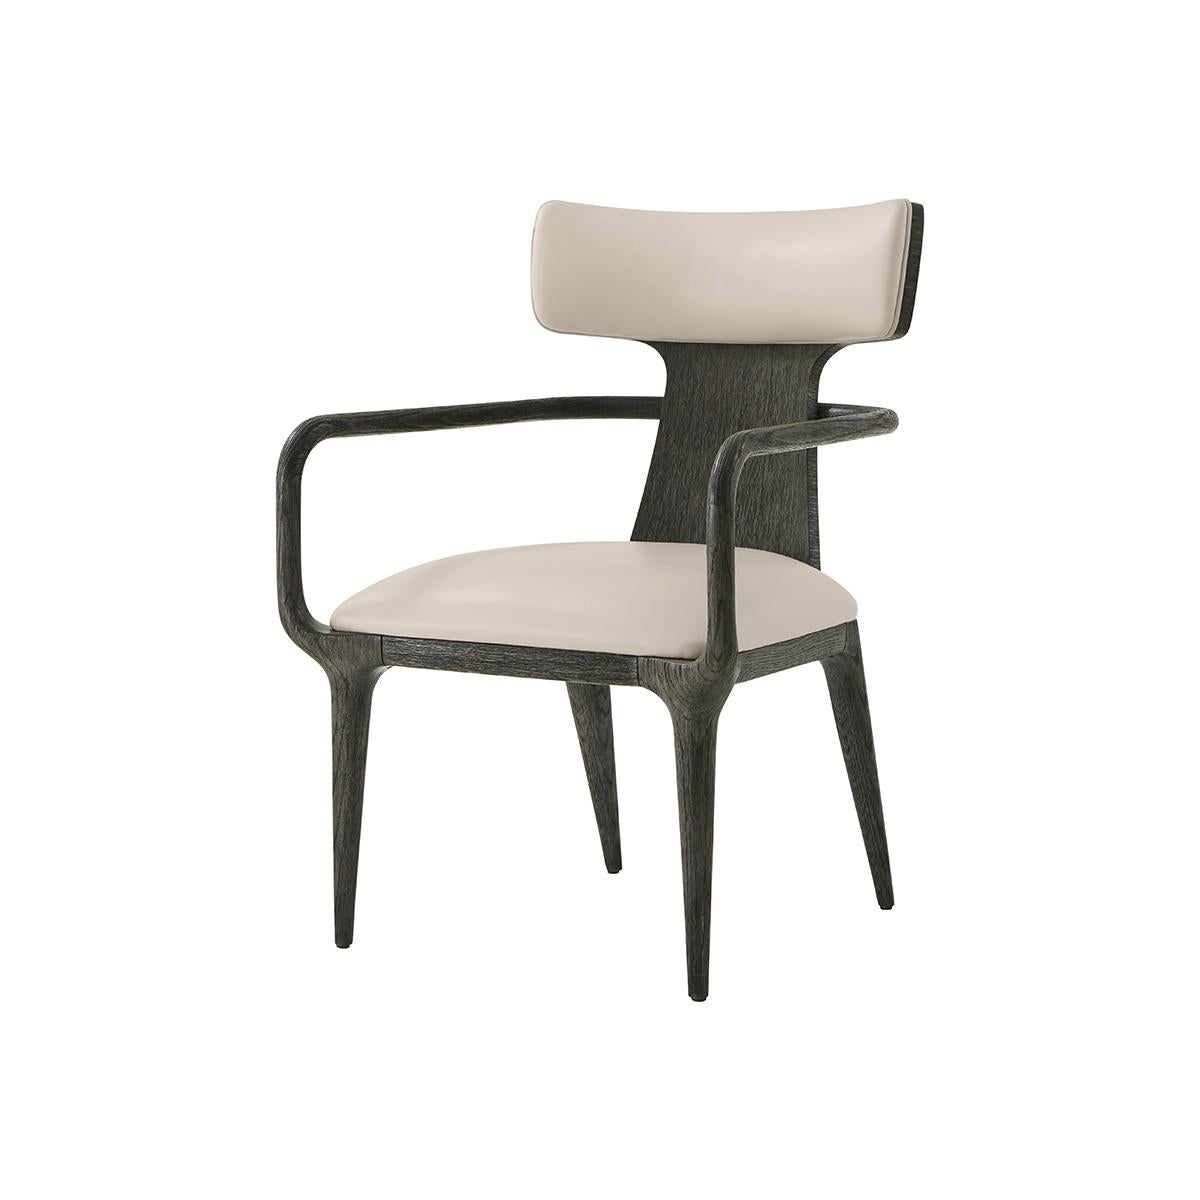 The upholstered dining arm chair features a subtle Scandinavian design with a twist on the traditional high-backed design, which makes it unique to your home. Its clean naturally tapered lines of the legs support a plush medium firm density